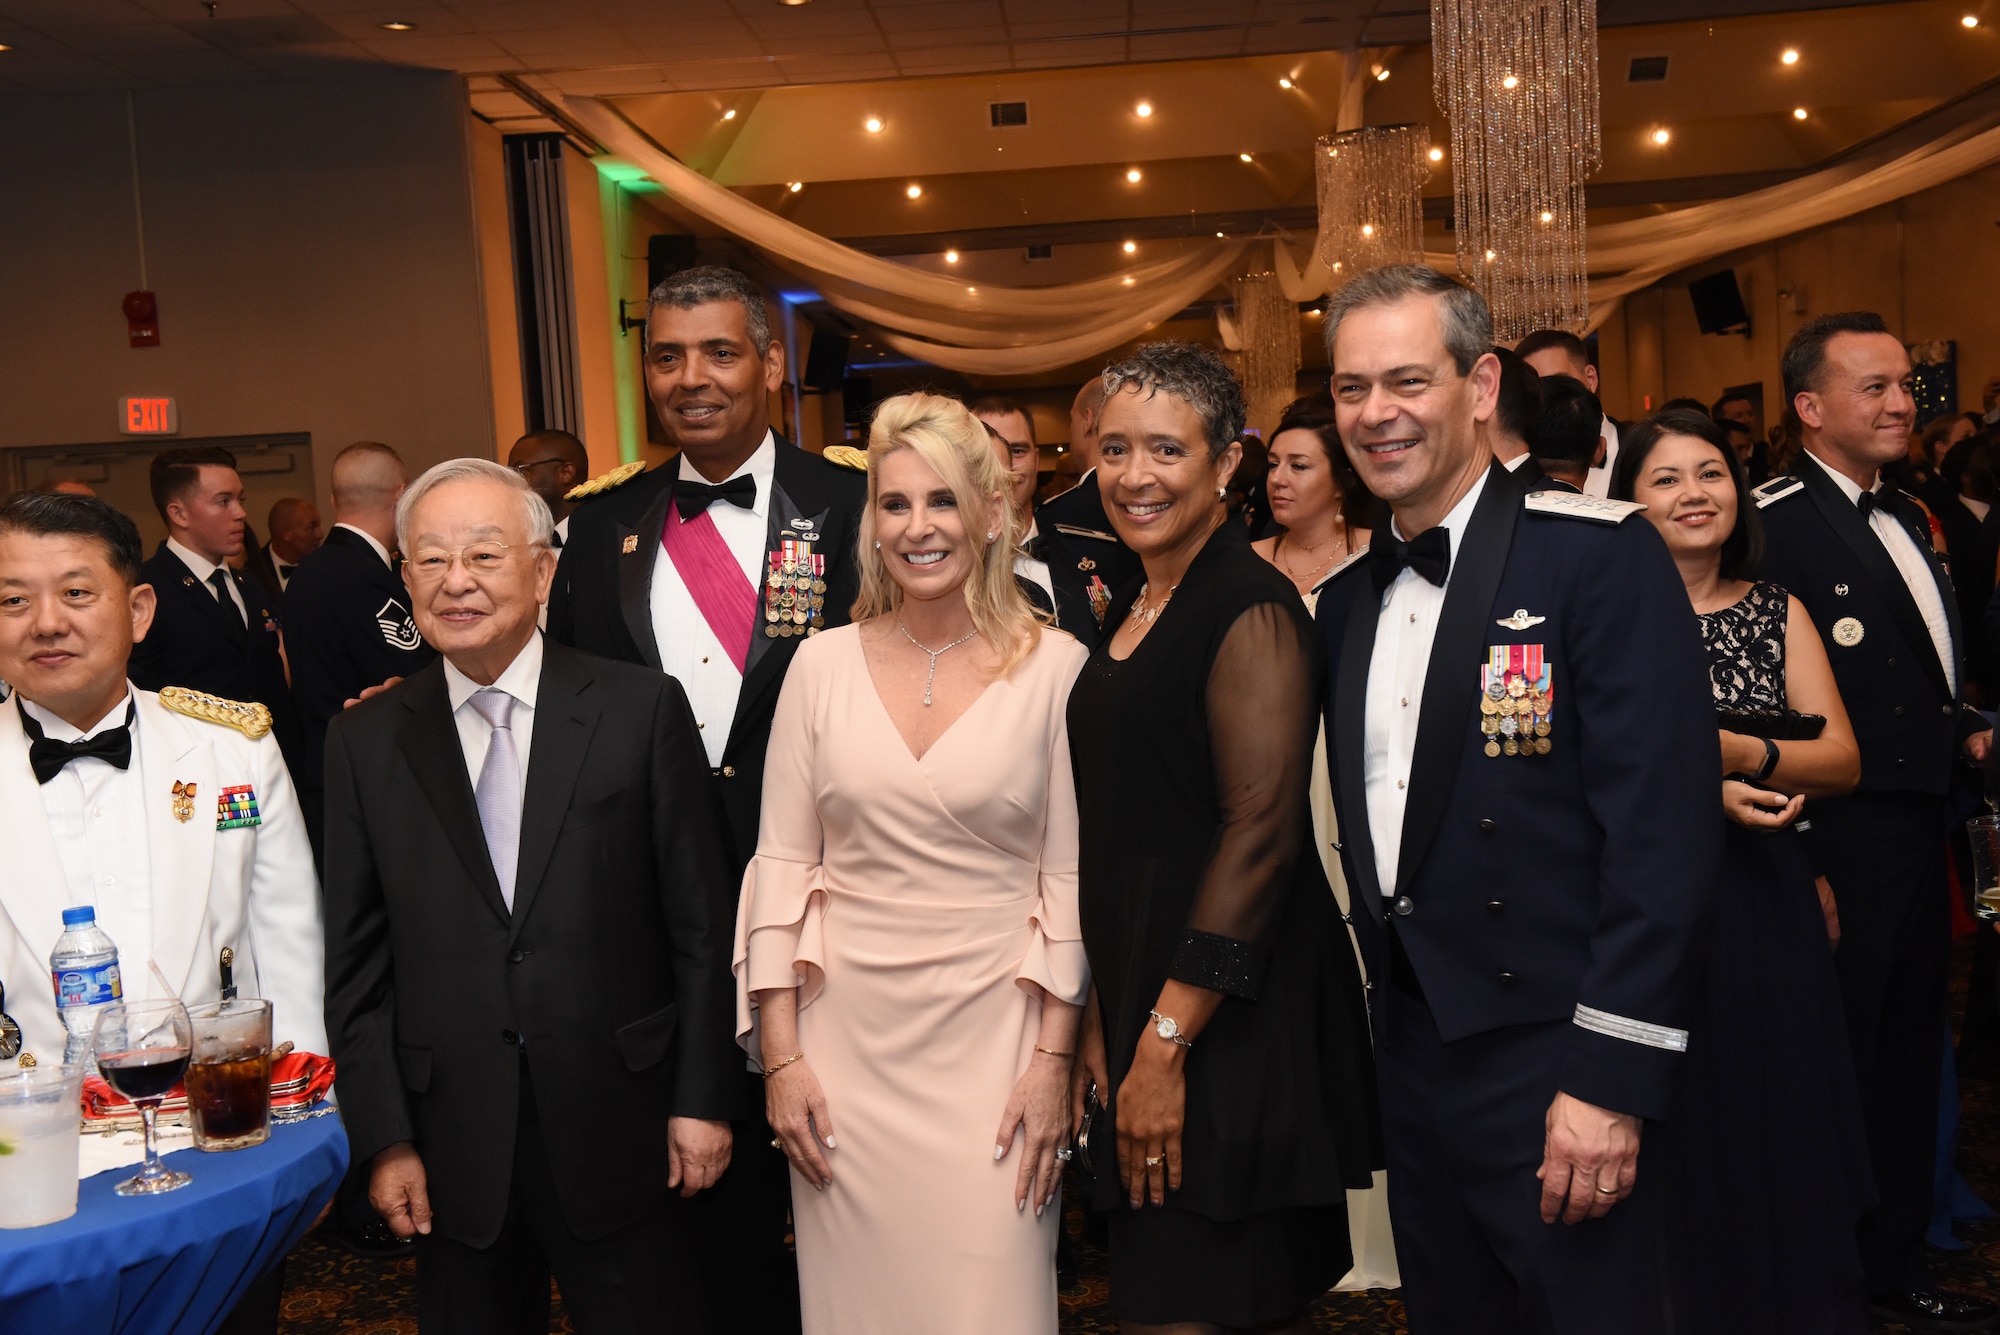 U.S. Army Gen. Vincent K. Brooks, U.S. Forces Korea and United Nations Command commander, Lt. Gen. Kenneth S. Wilsbach, Seventh Air Force commander, thier wives, and other distinguished guests pose for a photo at an Air Force 71st Birthday Ball held at Osan Air Base, Republic of Korea, September 15, 2018.